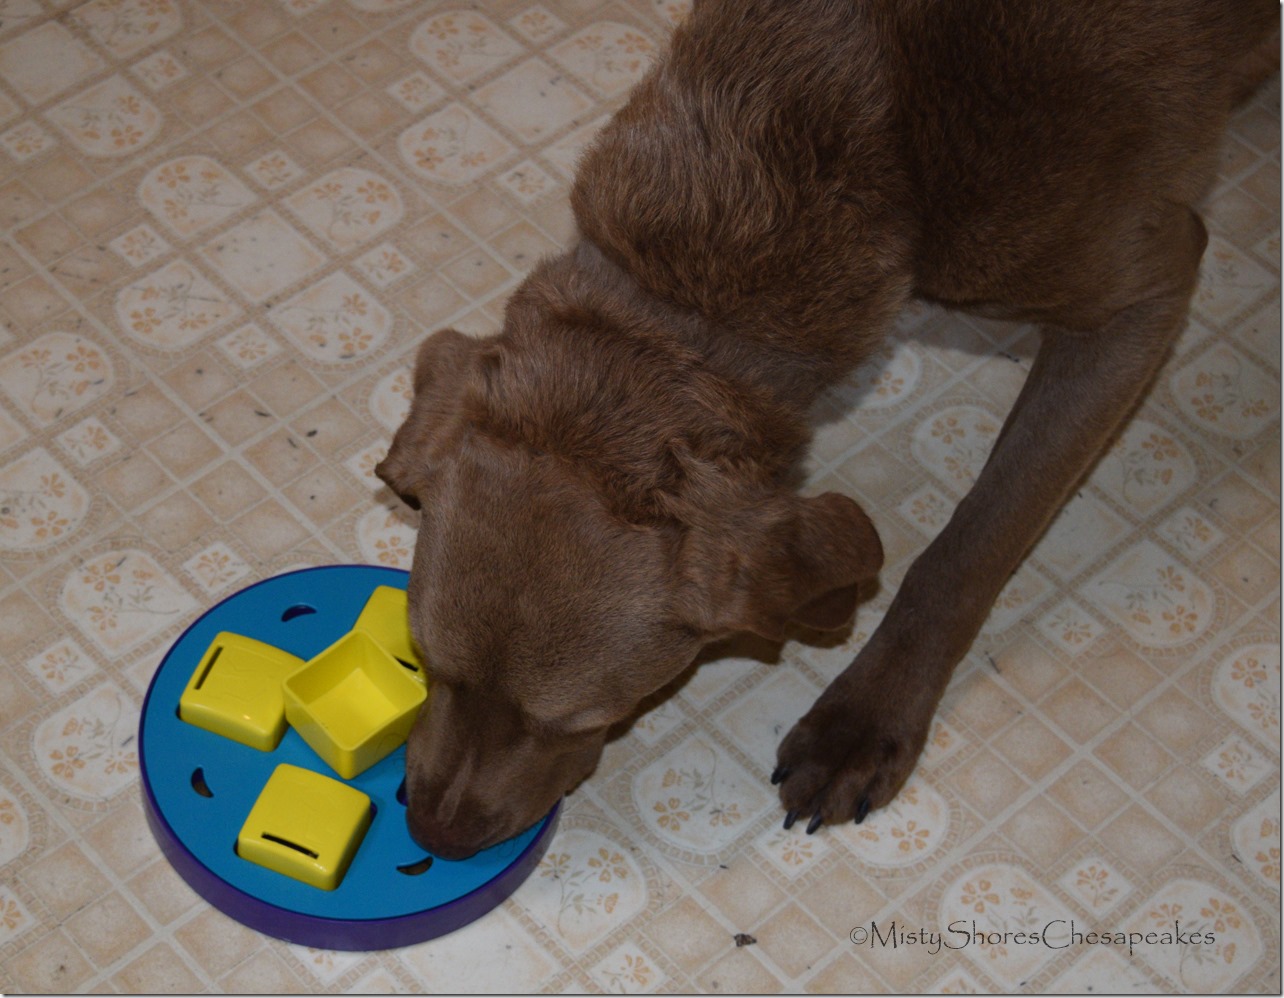 Misty Shores Chesapeakes Outward Hound Puzzle Dog Toy Review (10)